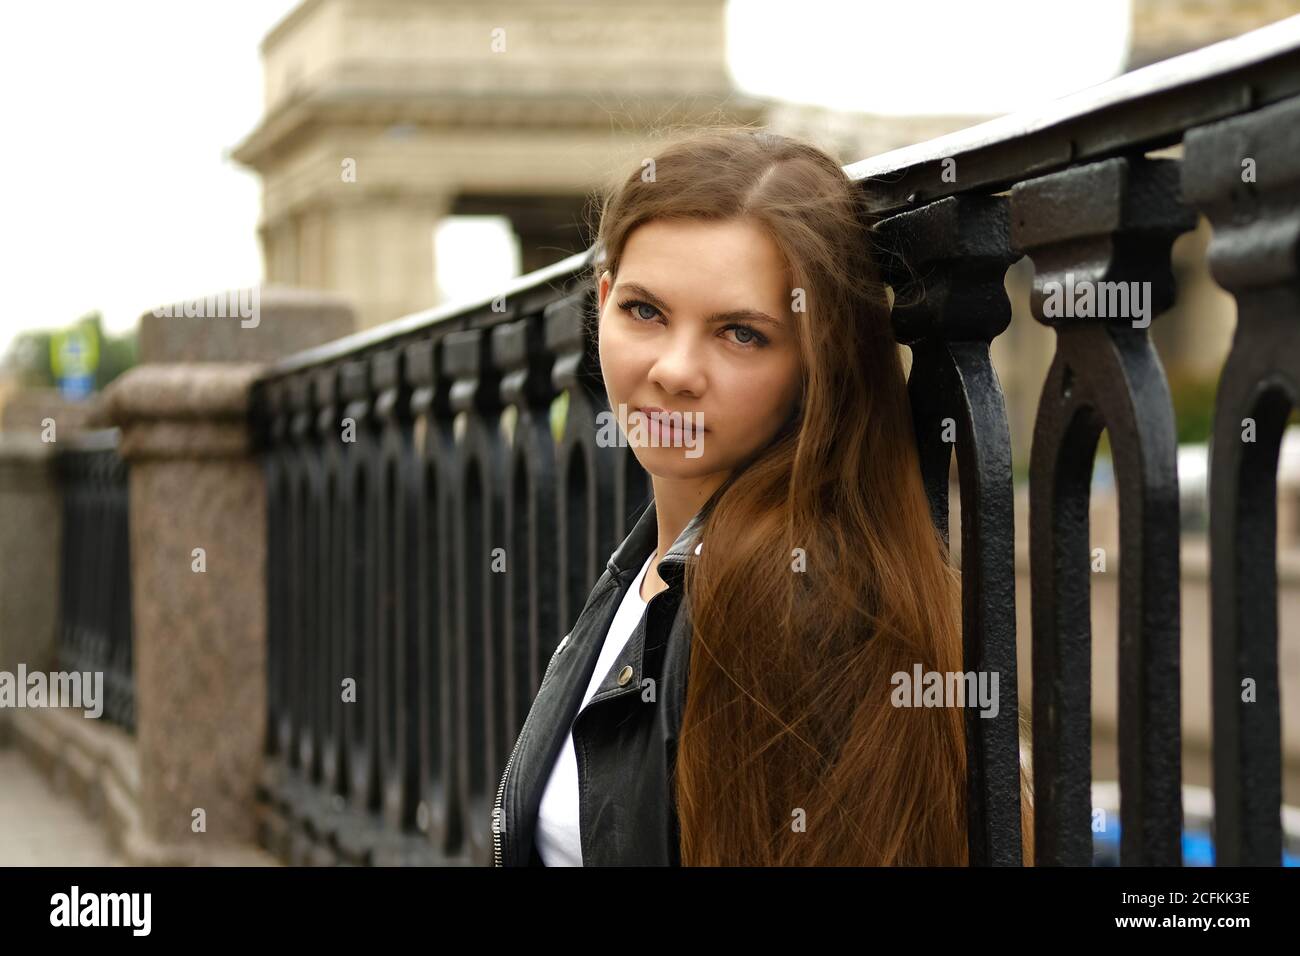 Young woman with long hair walking along the street of a big city. Saint Petersburg, Russia. Stock Photo